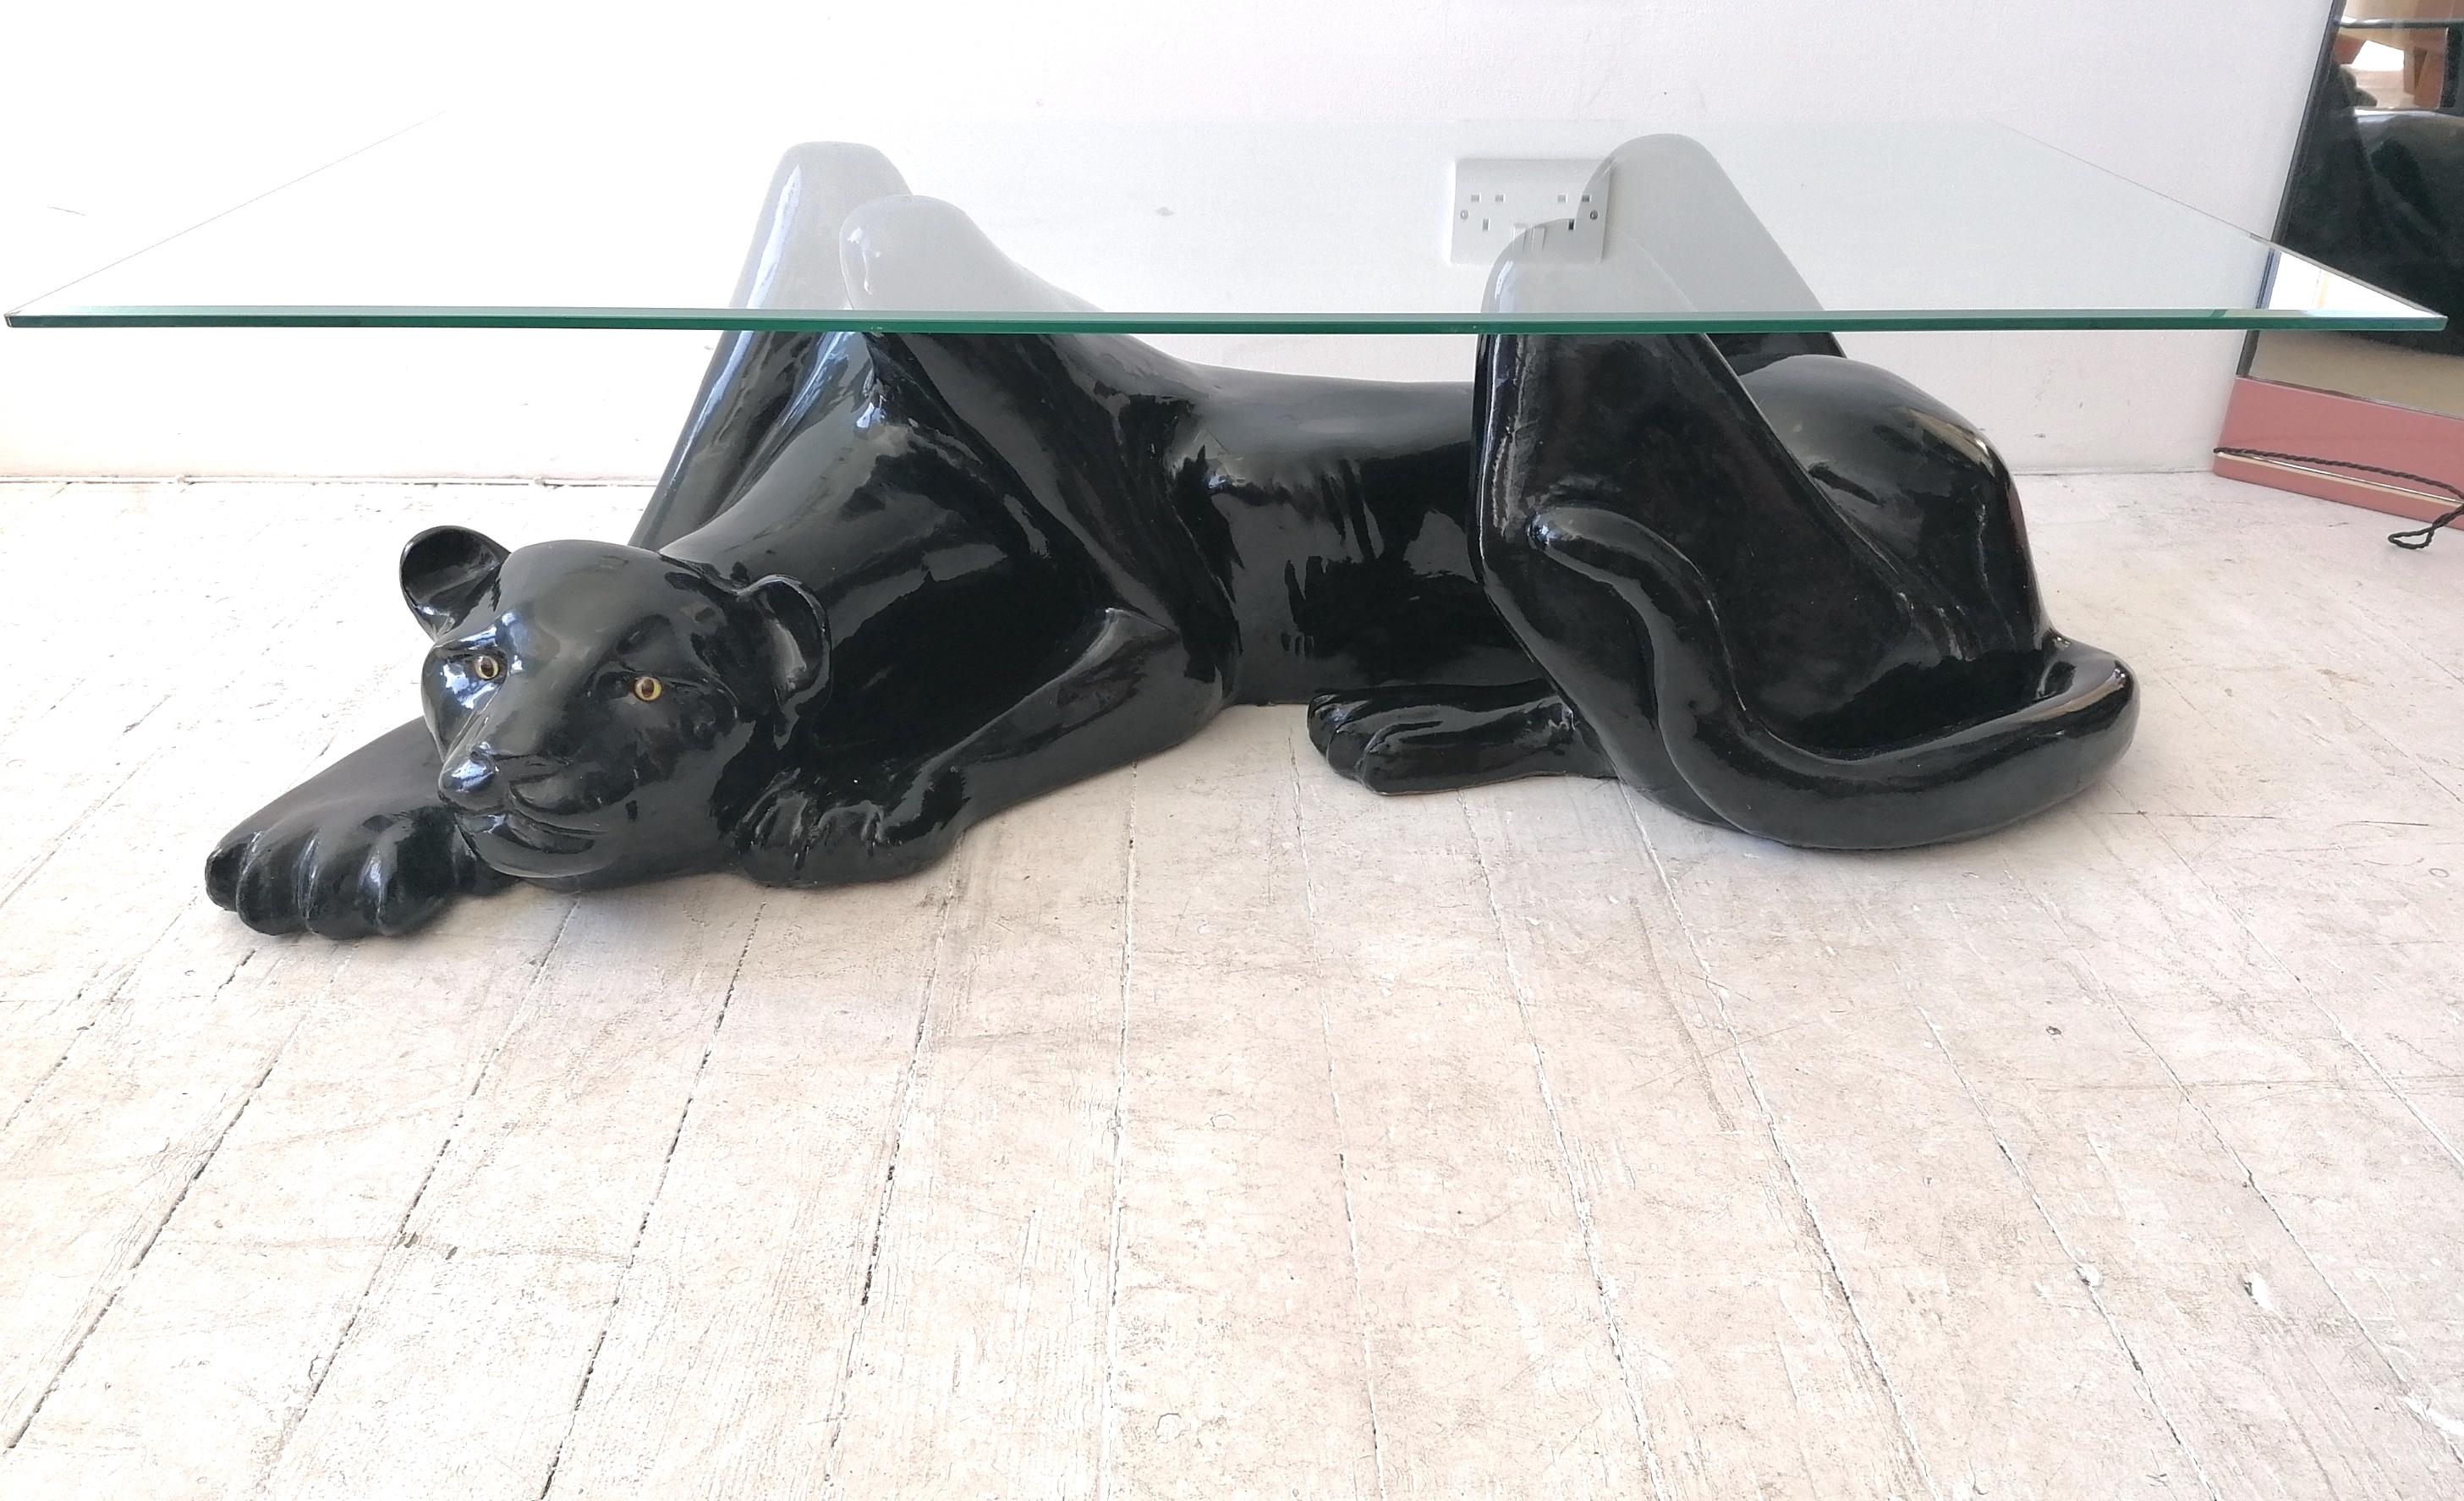 Large Art Deco Revival black panther coffee table with bevelled glass top. Sourced in Palm Springs, USA. Dates from the late 1970s/ mid 80s. The heavy fibreglass (feels like ceramic) panther crouches under a glass top. He has glass eyes.
Very hard